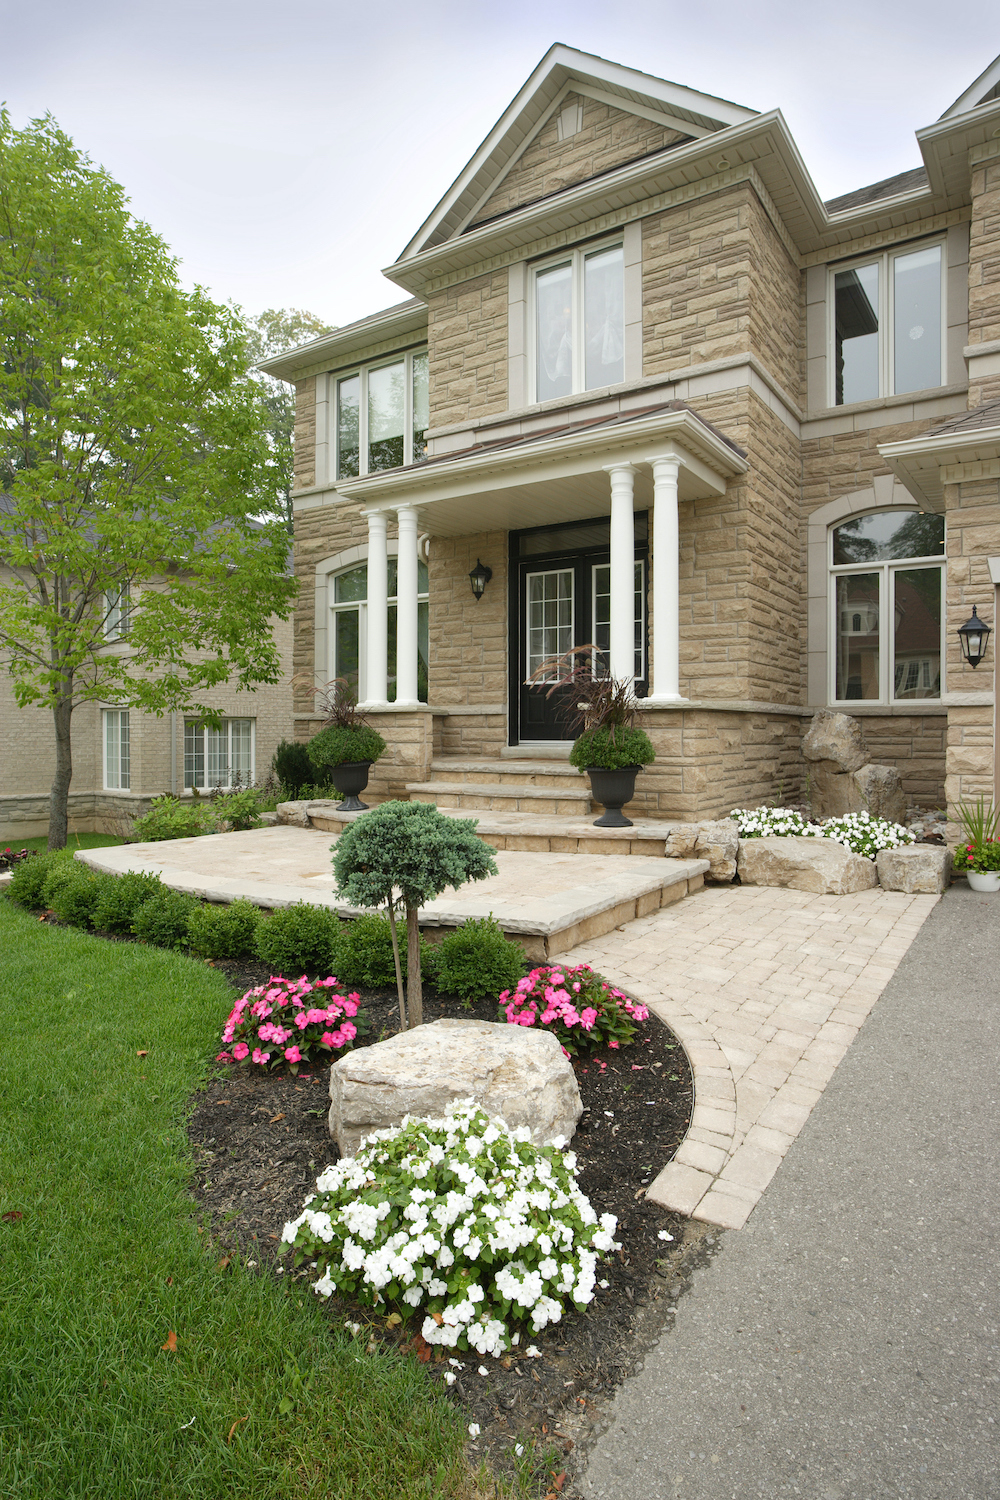 Classic two story stone house with four white columns on the front porch, a black double front door, a landscaped front yard, and a stone paver front path and entryway steps